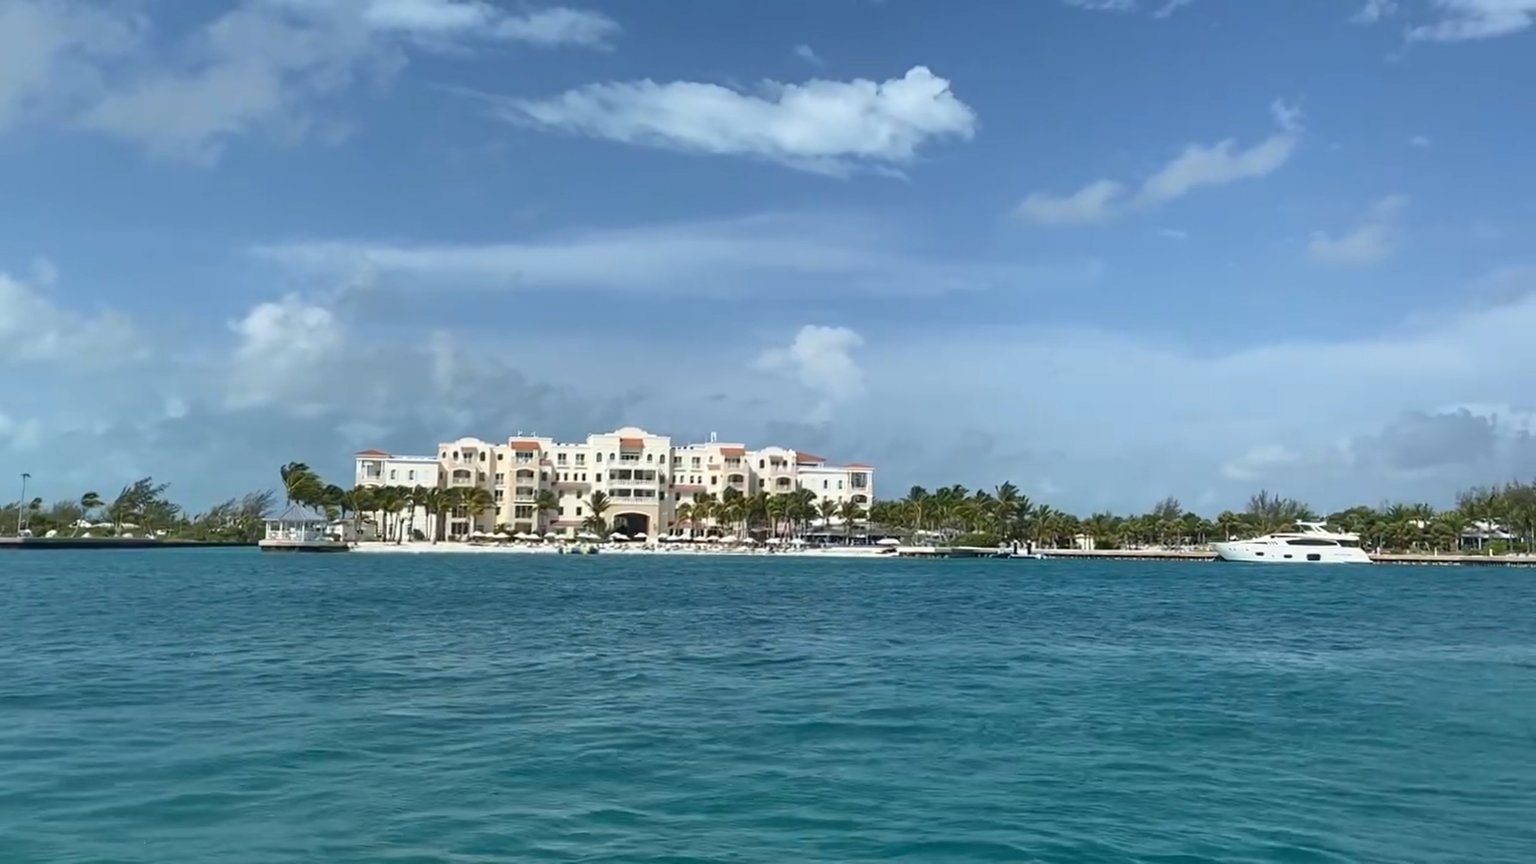 A view of the Blue Haven Resort from the Leeward Channel